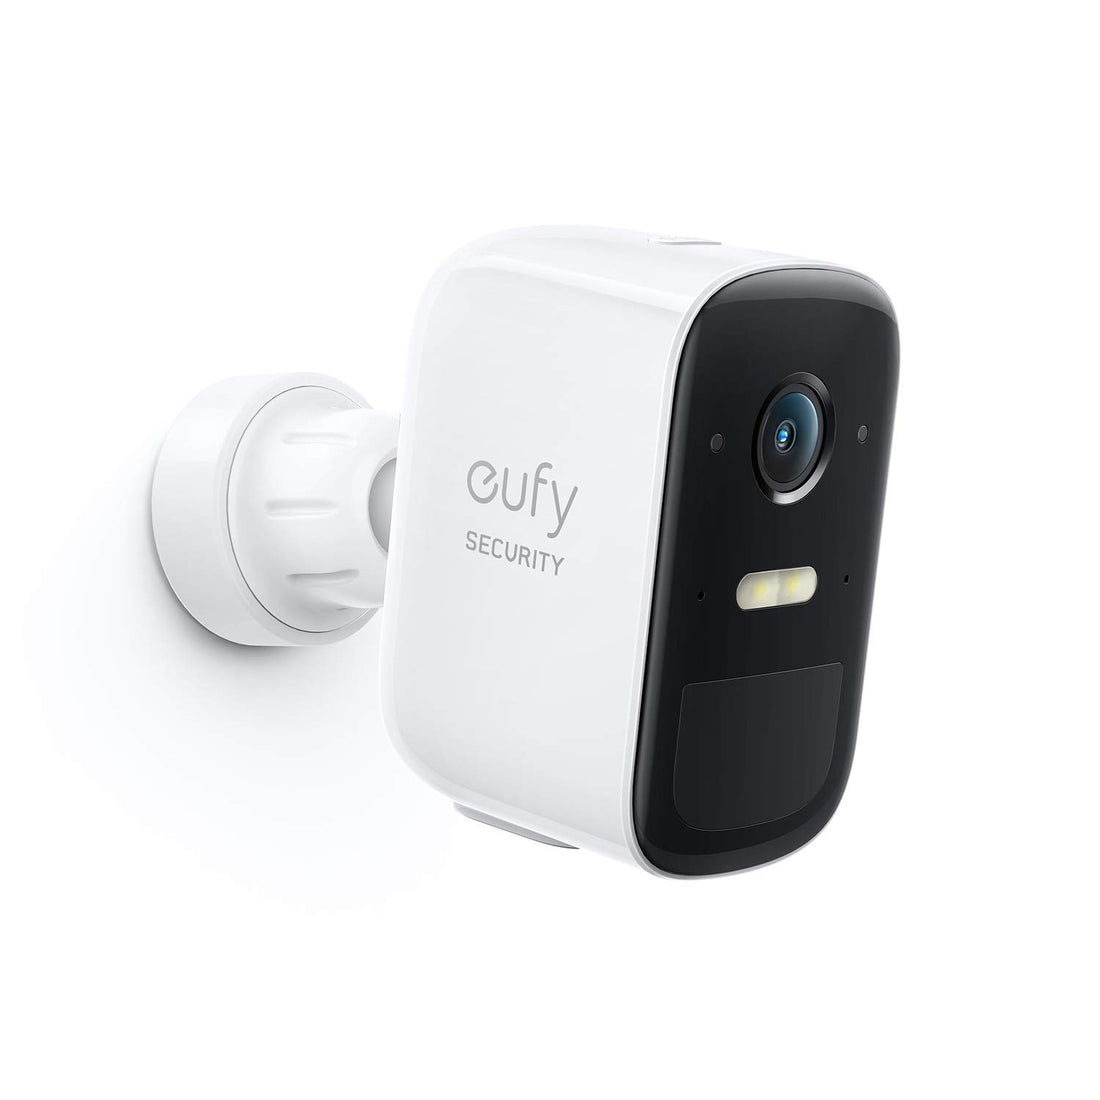 eufy Security, eufyCam 2C Pro Wireless Home Security Add-on Camera, 2K Resolution, 180-Day Battery Life, HomeKit Compatibility, IP67 Weatherproof, Night Vision, and No Monthly Fee